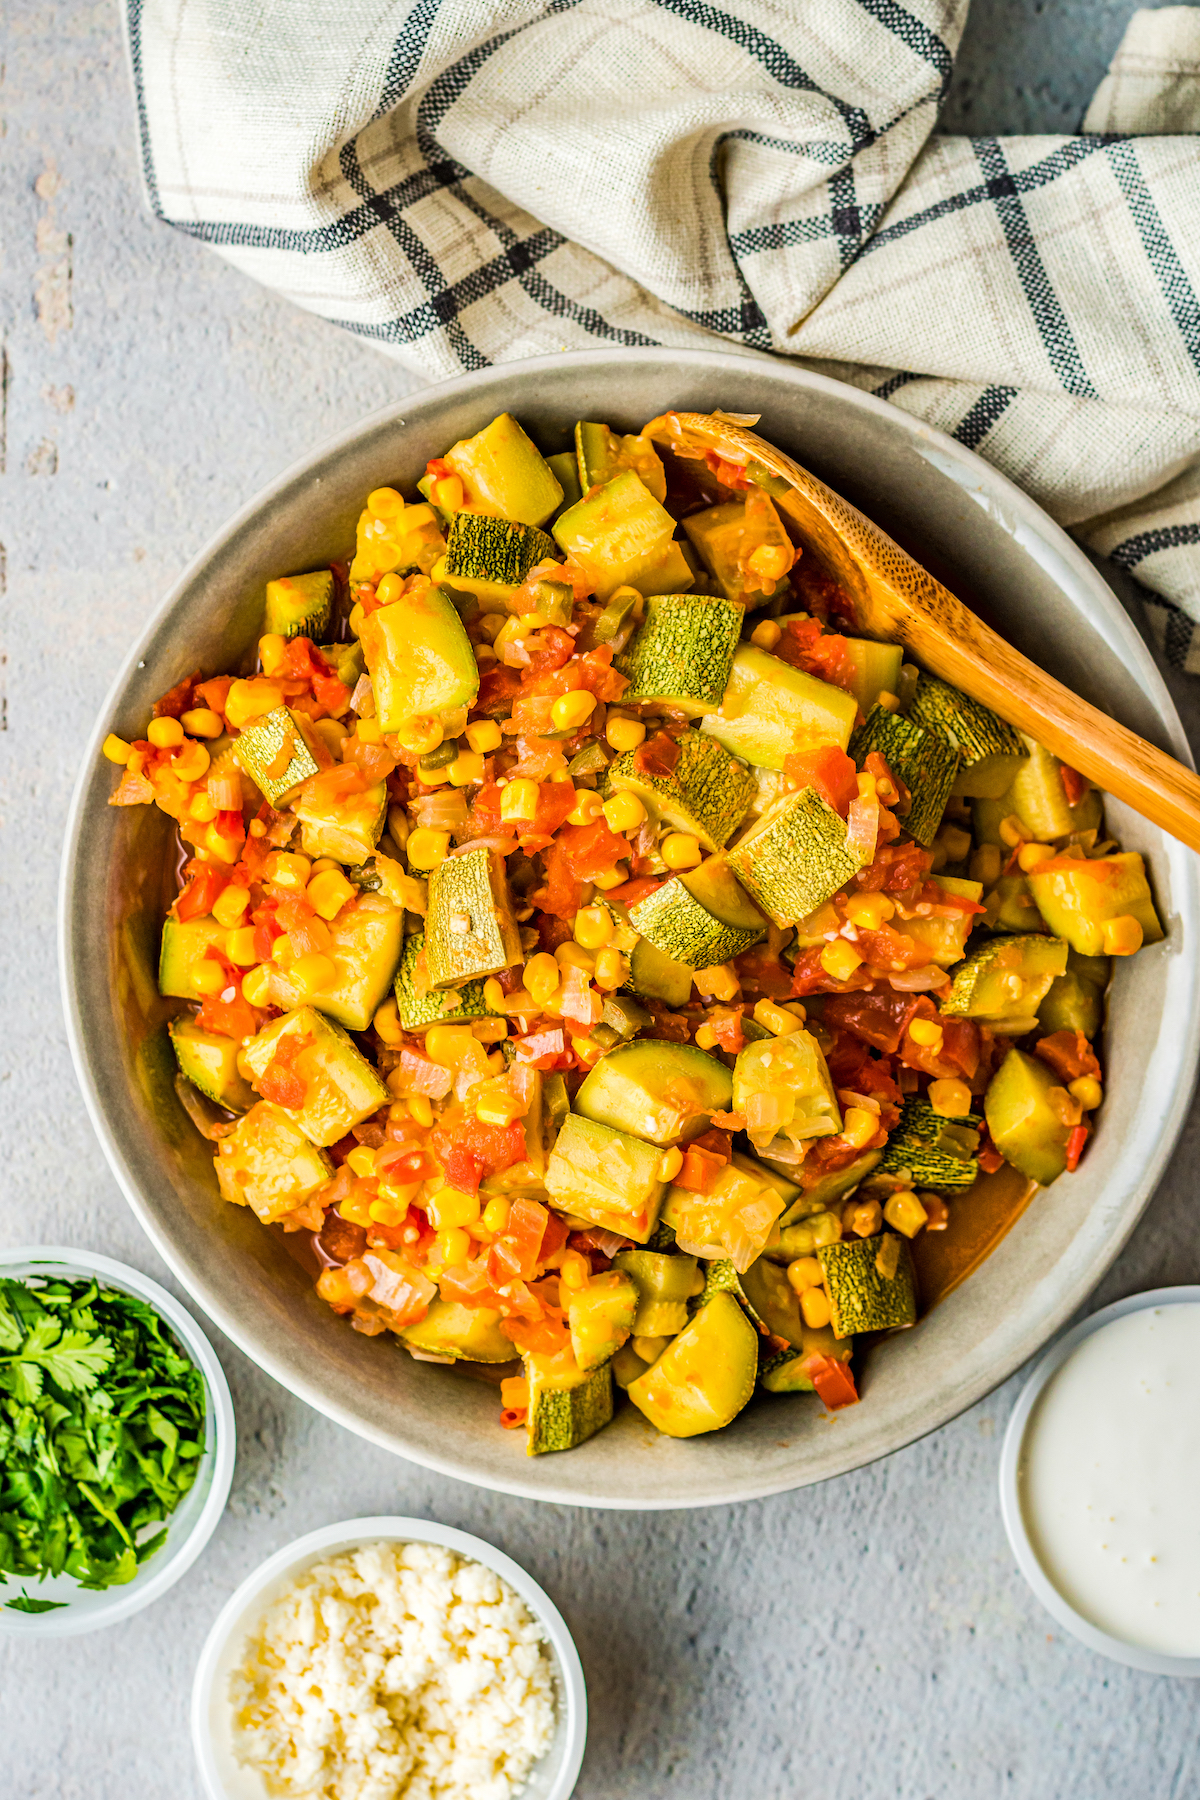 Cooked squash, corn, and tomato medley in a large bowl with a wooden spoon.